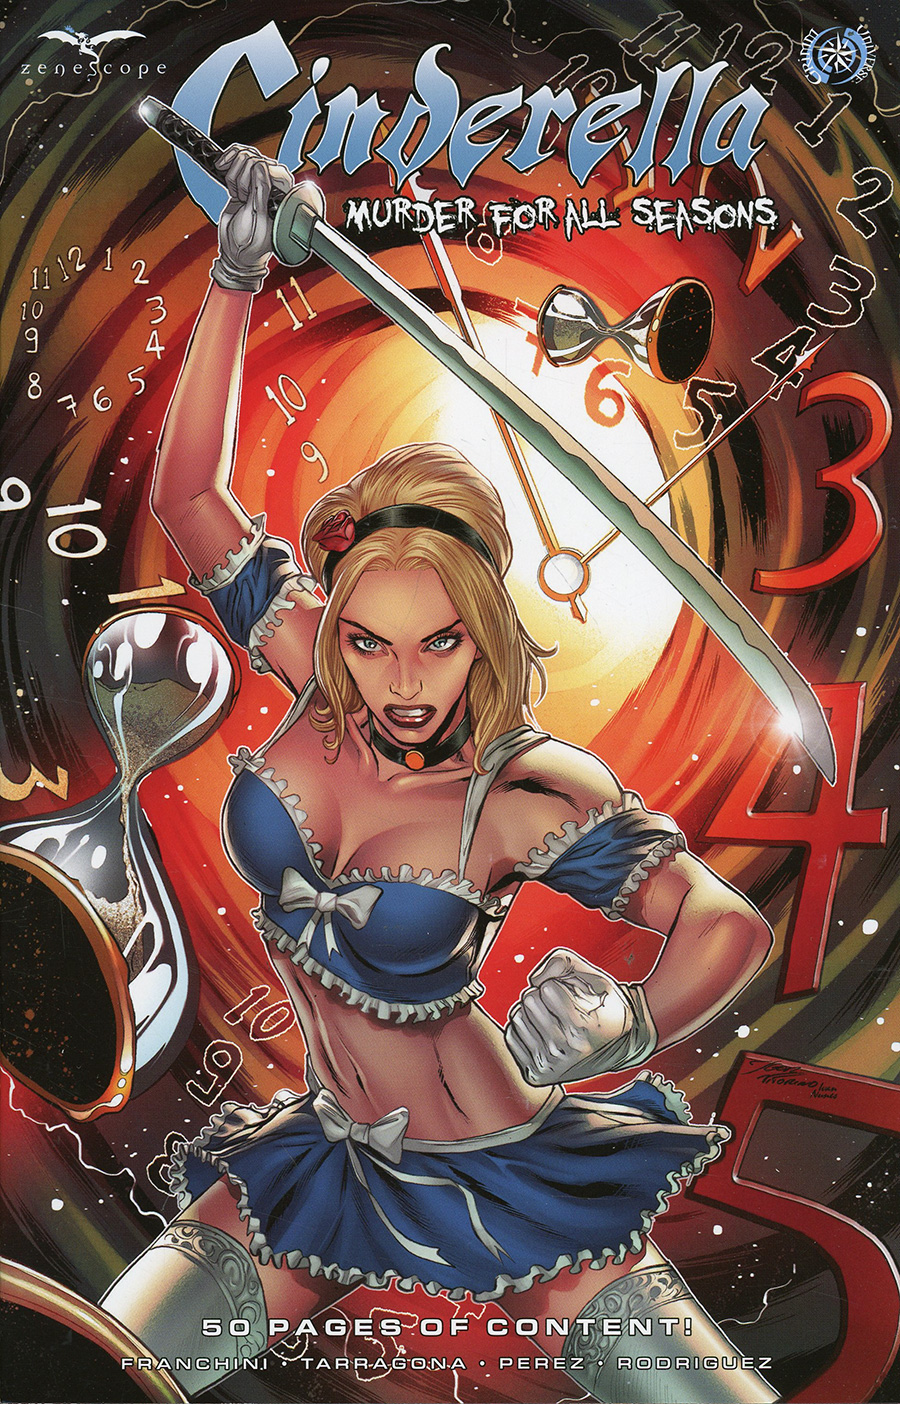 Grimm Fairy Tales Presents Cinderella Murder For All Seasons #1 (One Shot) Cover A Regular Igor Vitorino Cover